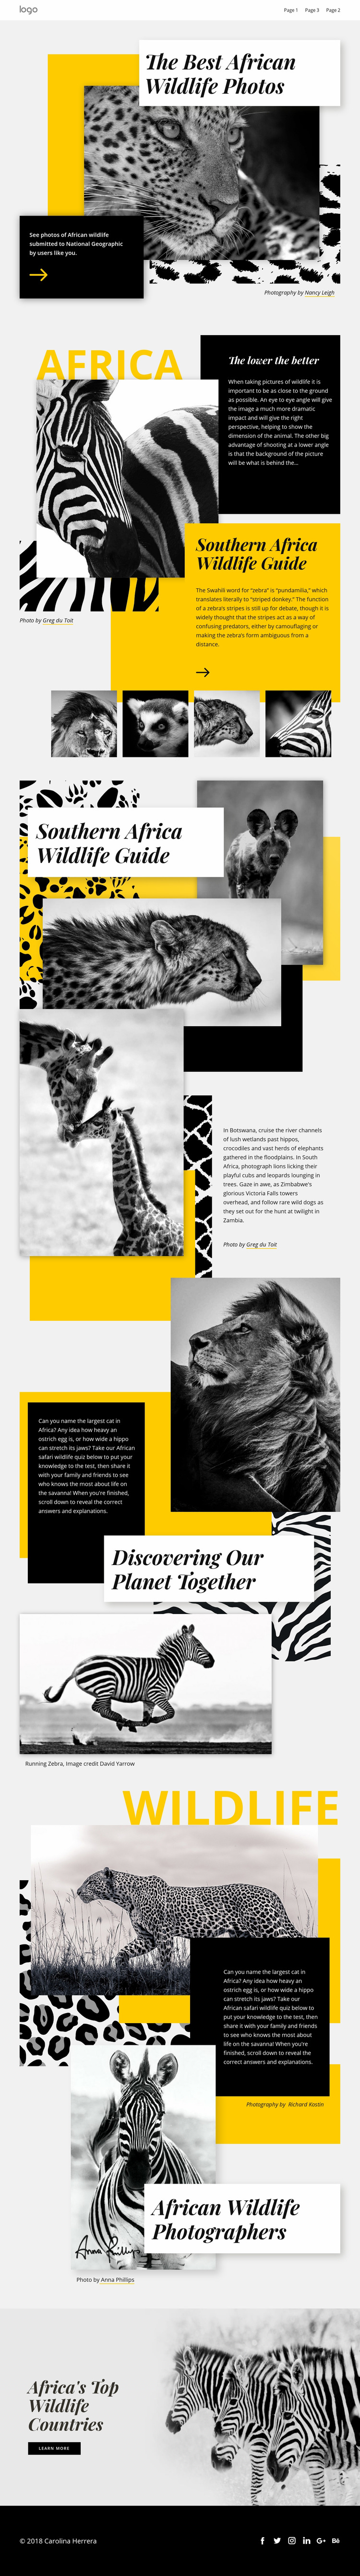 Best African Photos Web Page Design